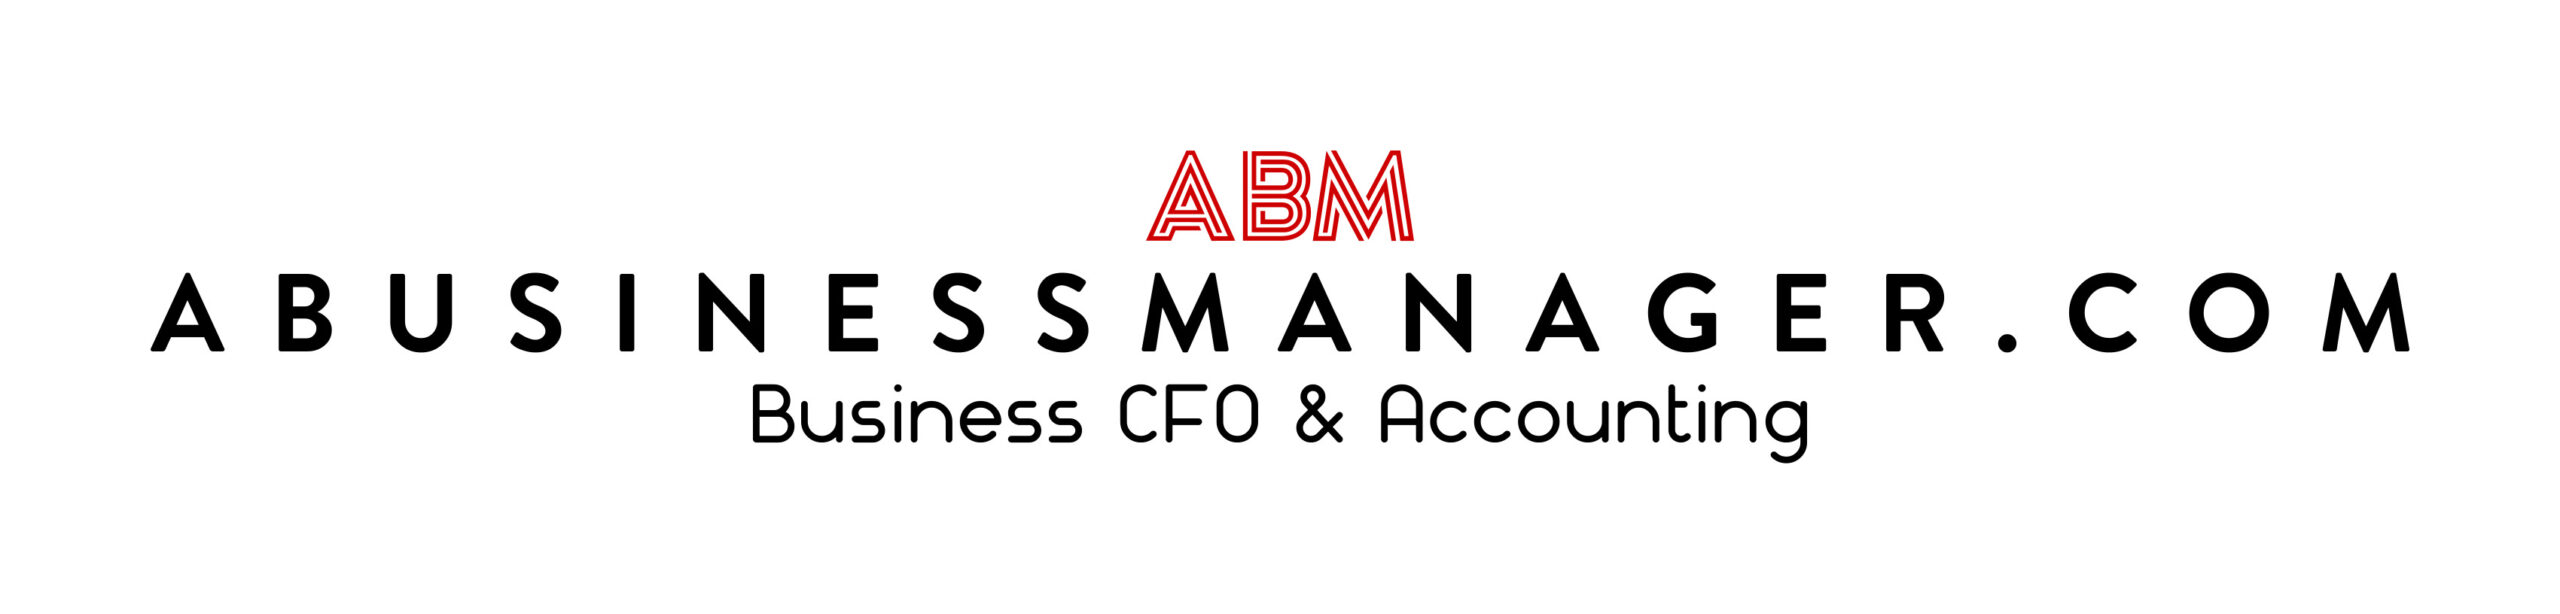 ABusinessManager.com Virtual CFO, Accounting and Bookkeeping Services for Businesses